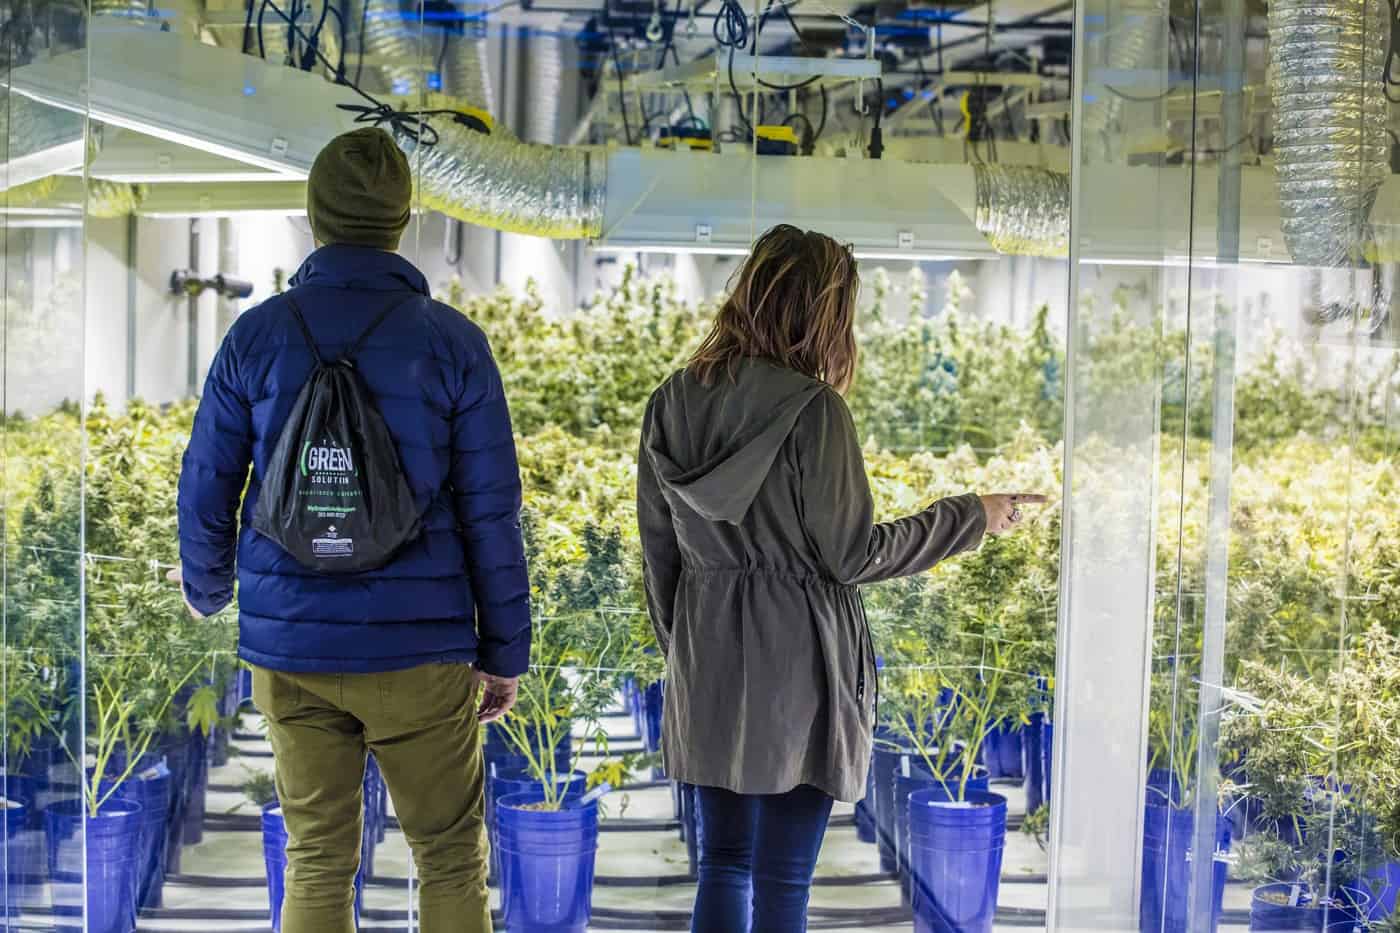 Customers watch cannabis grow in the "viewing tunnel" at Denver's Green Solution dispensary.